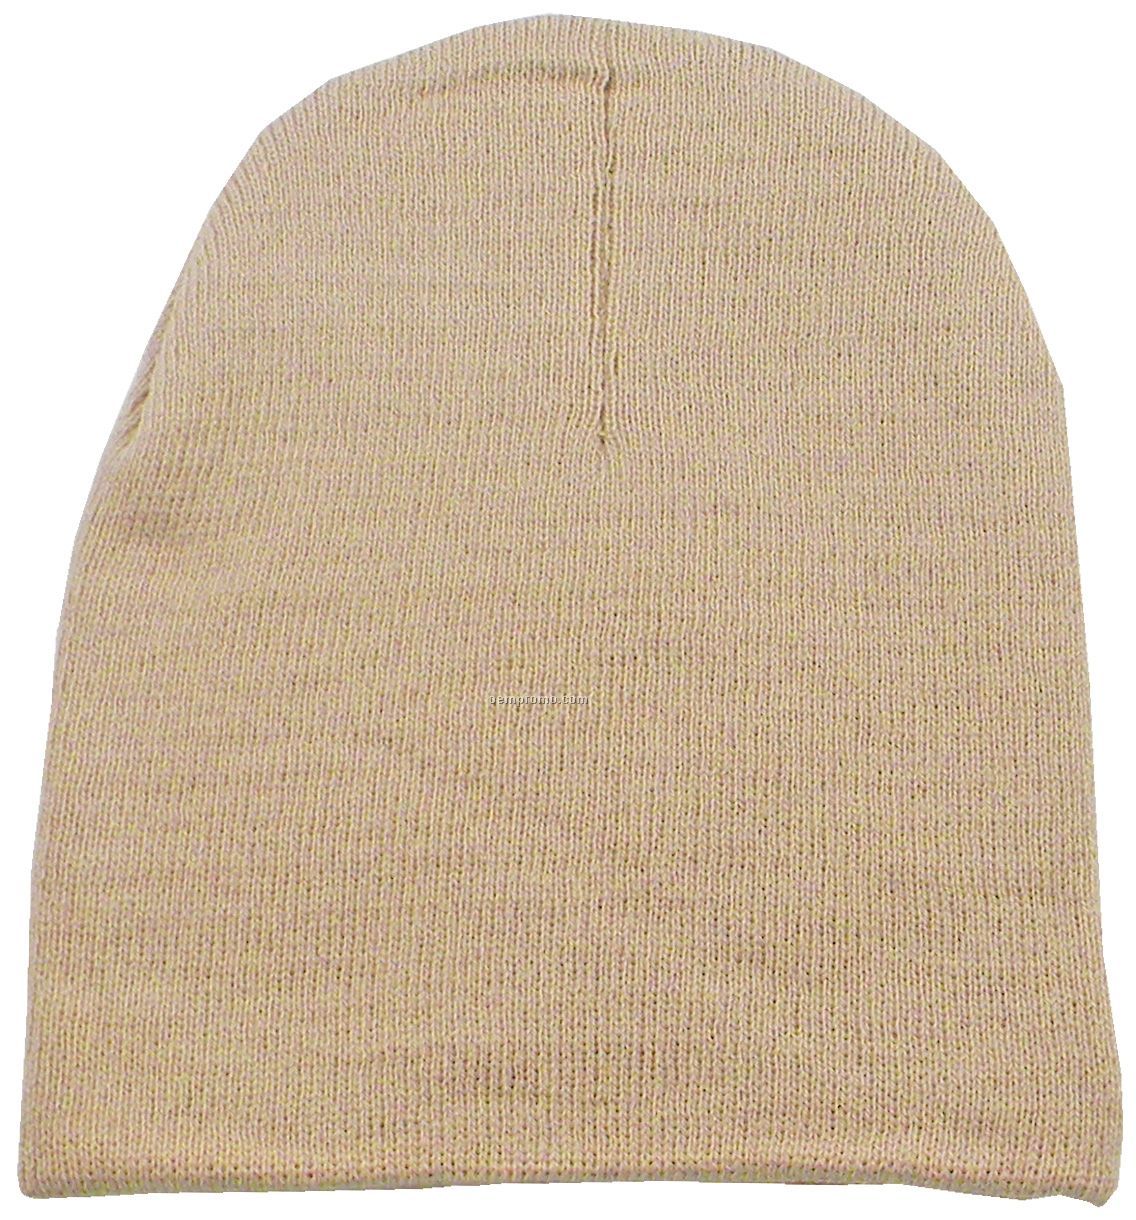 Short Knit Beanie Hat (Domestic 5 Day Delivery)